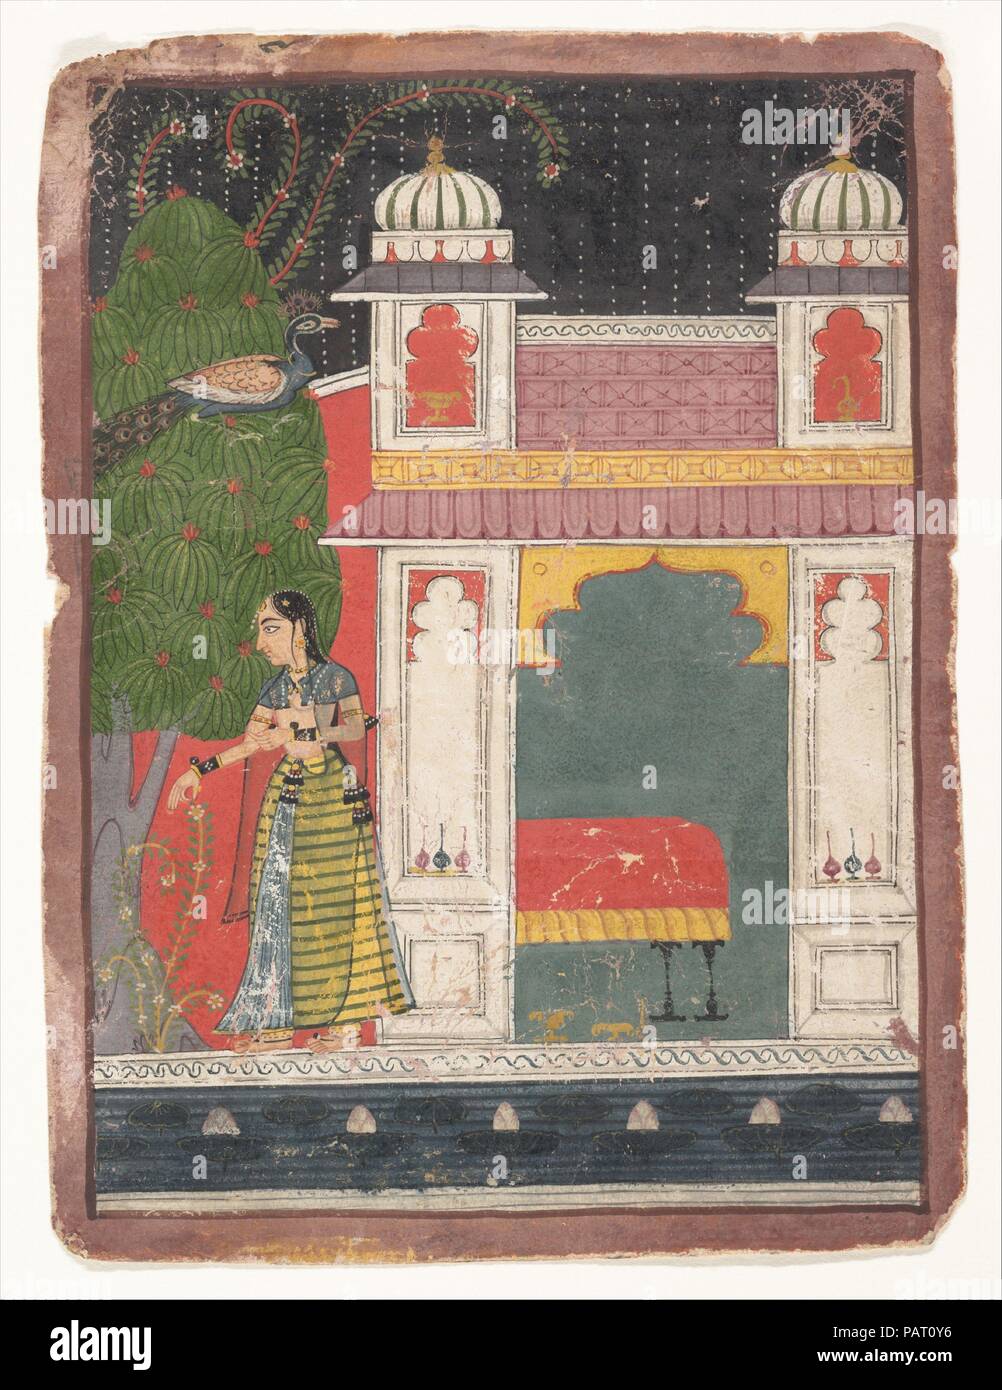 A Heroine Plucking a Flower:  Page from a Dispersed Nayikabheda. Culture: India (Madhya Pradesh, Malwa). Dimensions: 8 3/8 x 6 3/16 in. (21.3 x 15.7 cm). Date: ca. 1660-80.  The artist instilled this painting with an iconography of longing: the empty bed, the solitary nayika (heroine), and the forlorn call of the peacock. The patterned raindrops, stylized creepers, and surface treatment of the architecture distinguish this manuscript from other work done in the Malwa courts. The figural type suggests an awareness of the Mewar or Bundi traditions; the use of a black sky and a red color field be Stock Photo